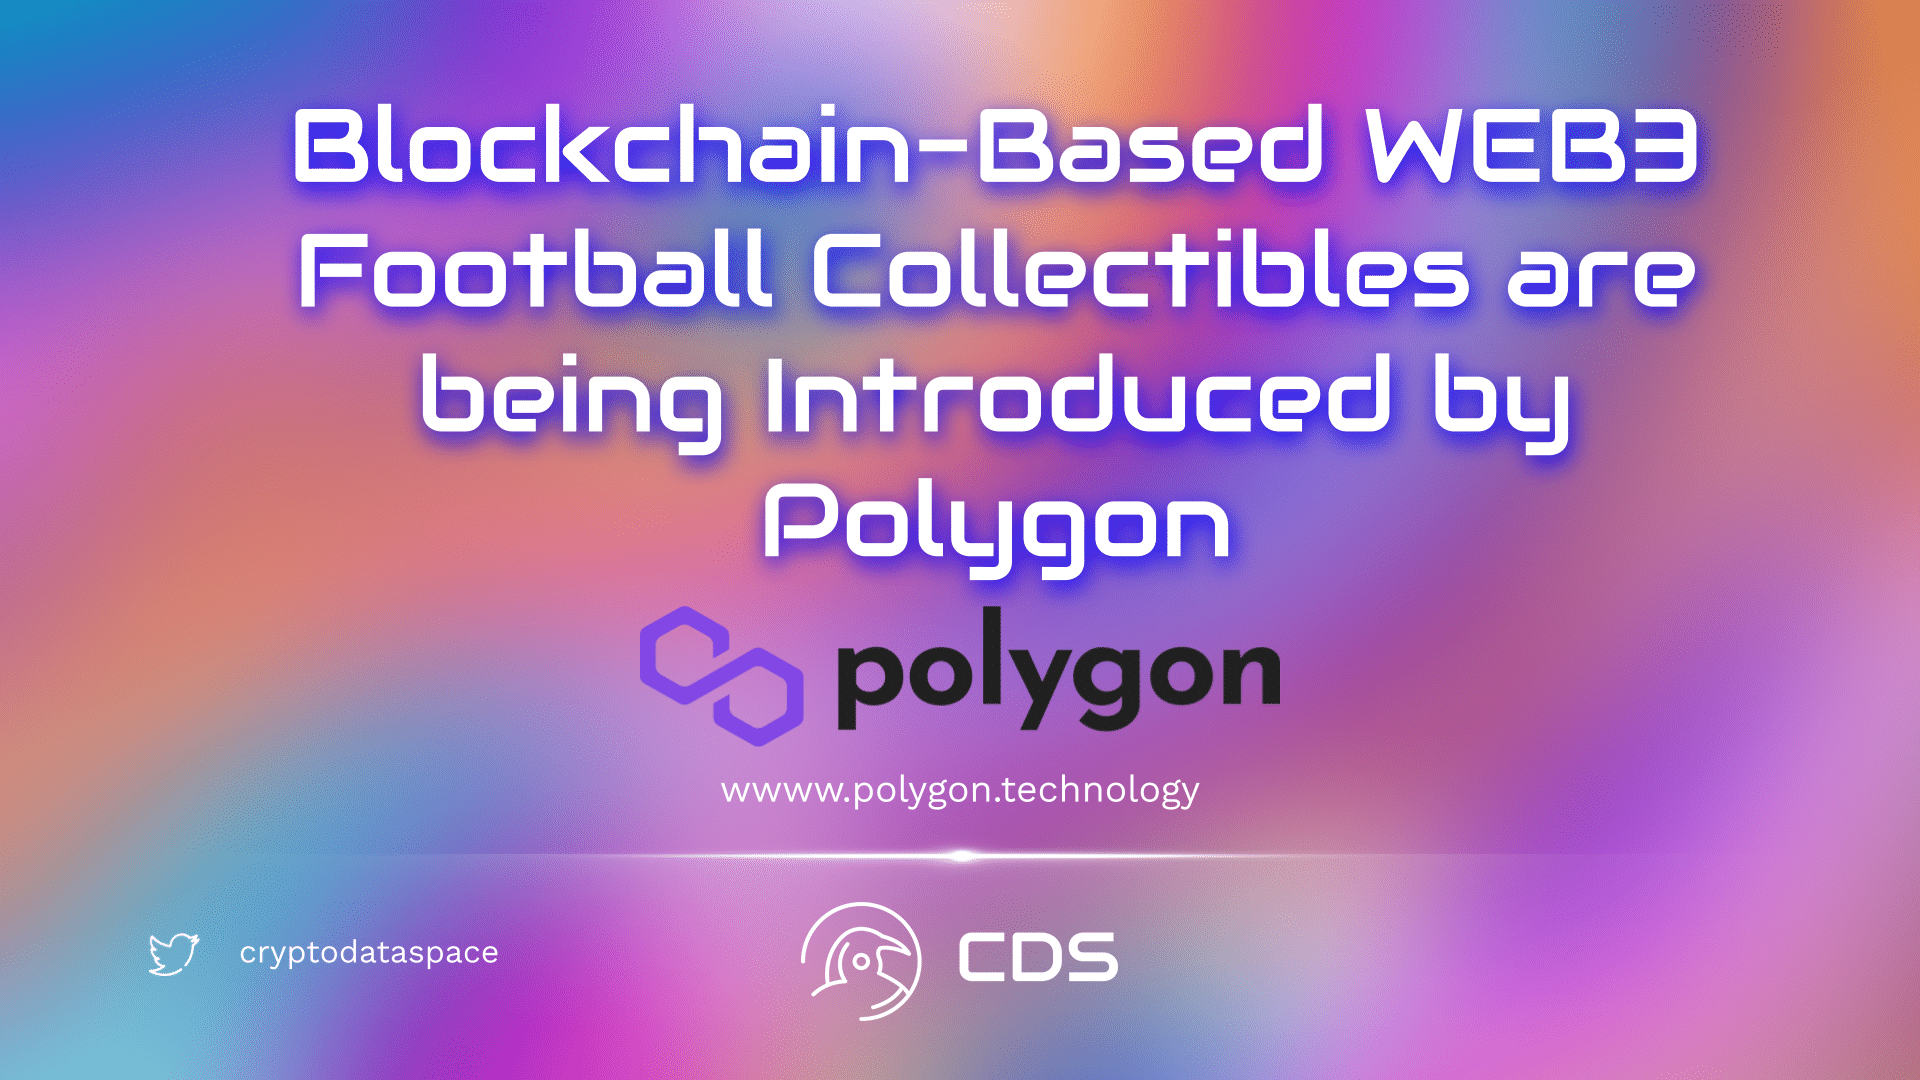 Blockchain-Based WEB3 Football Collectibles are being Introduced by Polygon